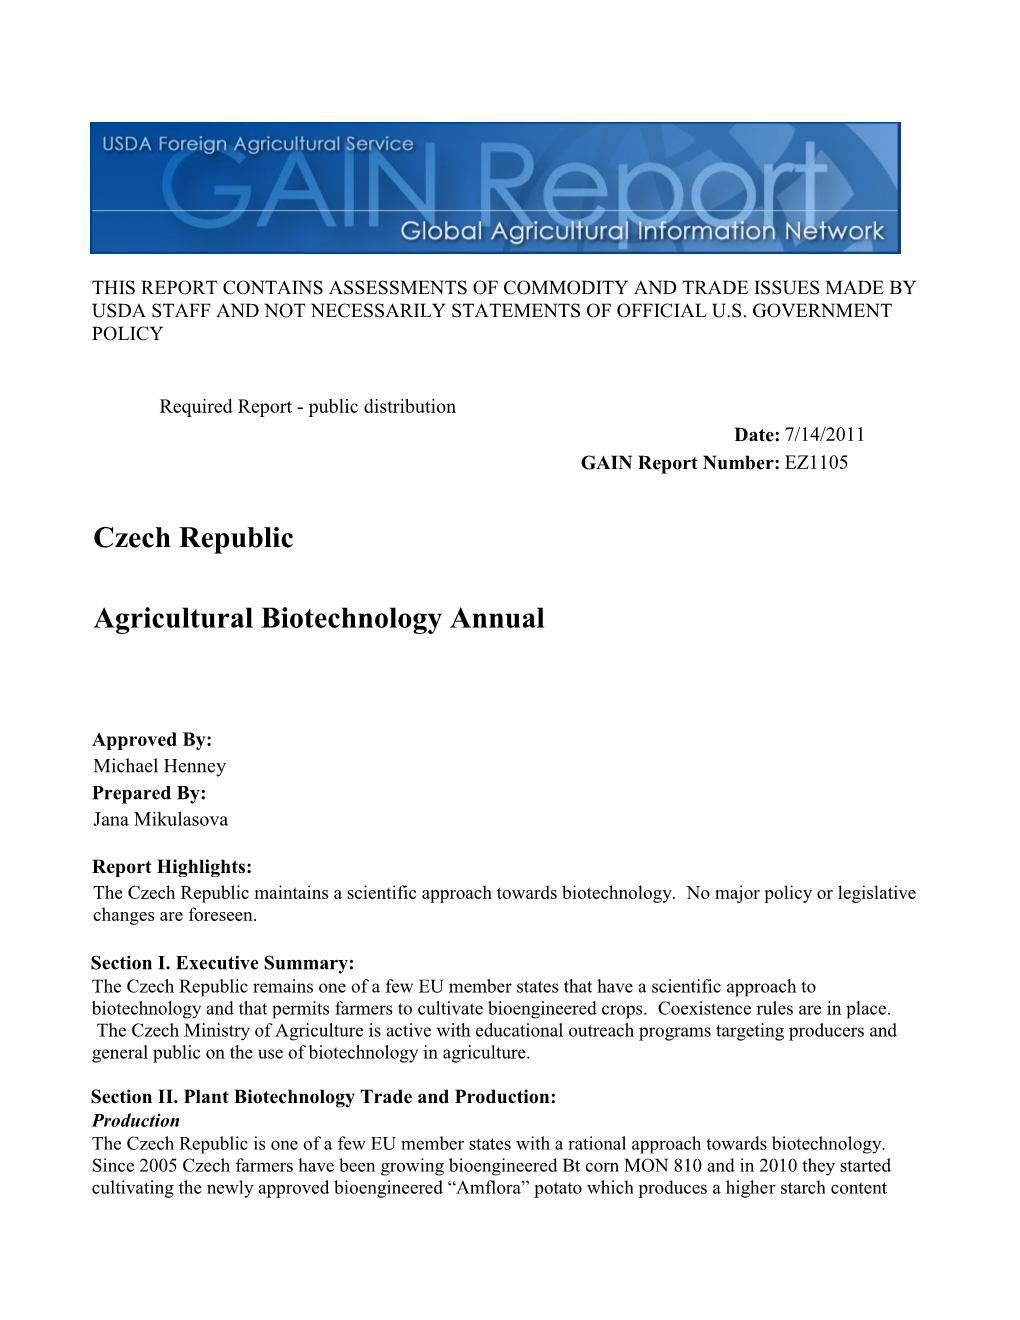 Agricultural Biotechnology Annual Czech Republic